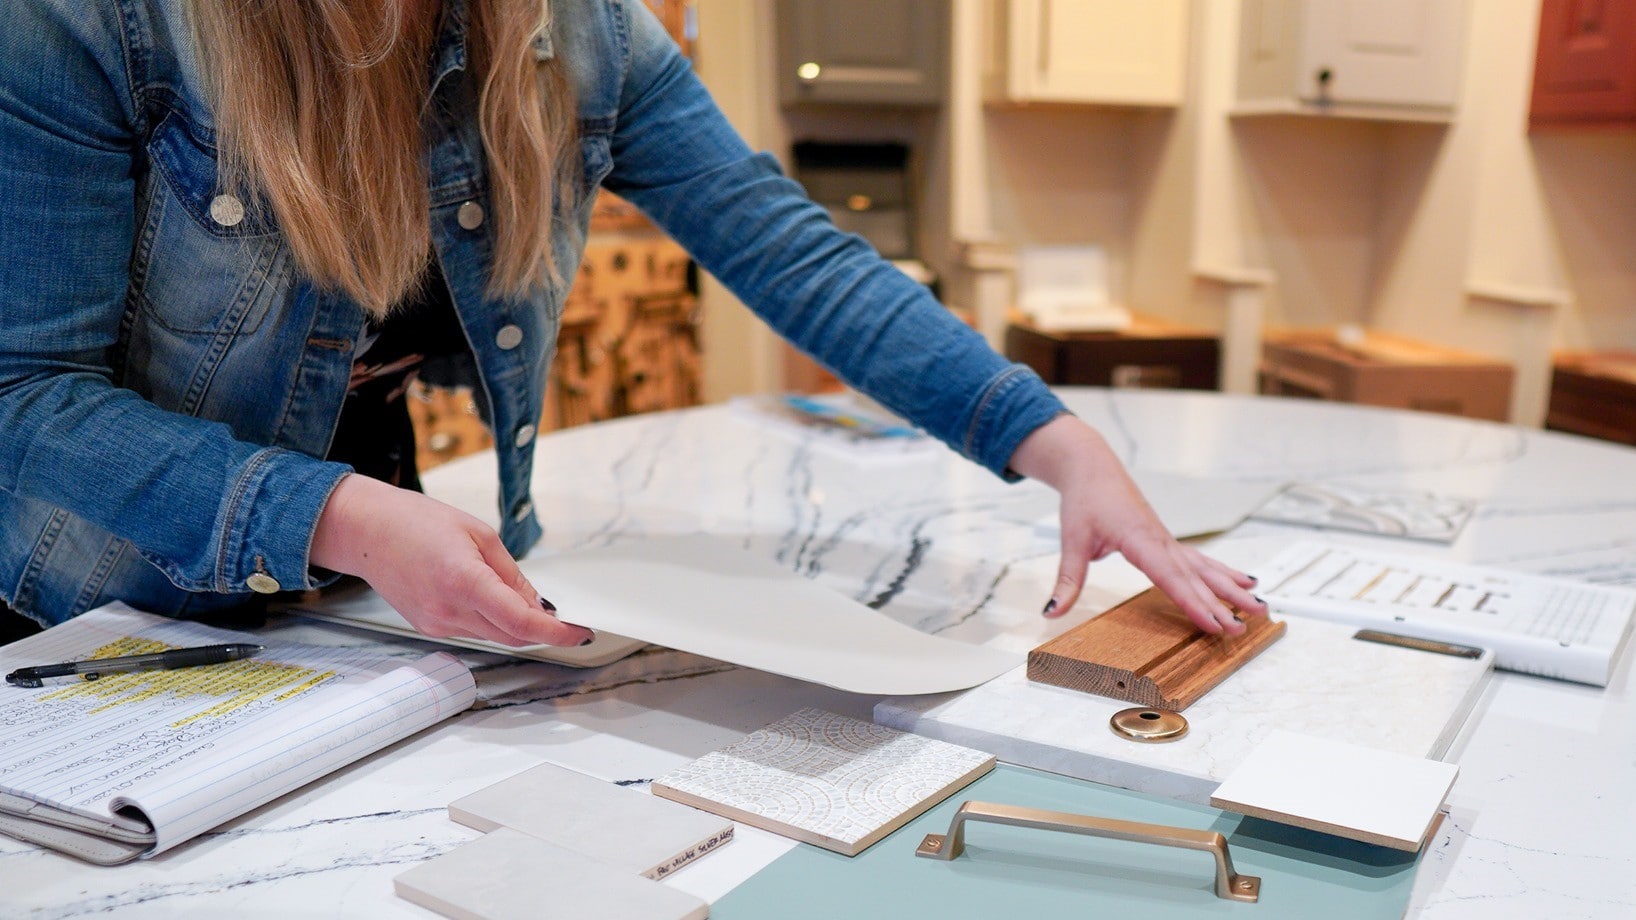 Most homeowners struggle to turn their home into the place they’ve always imagined. At Advantage Design + Remodel, we blend our expertise with an easy-to-follow remodeling process.